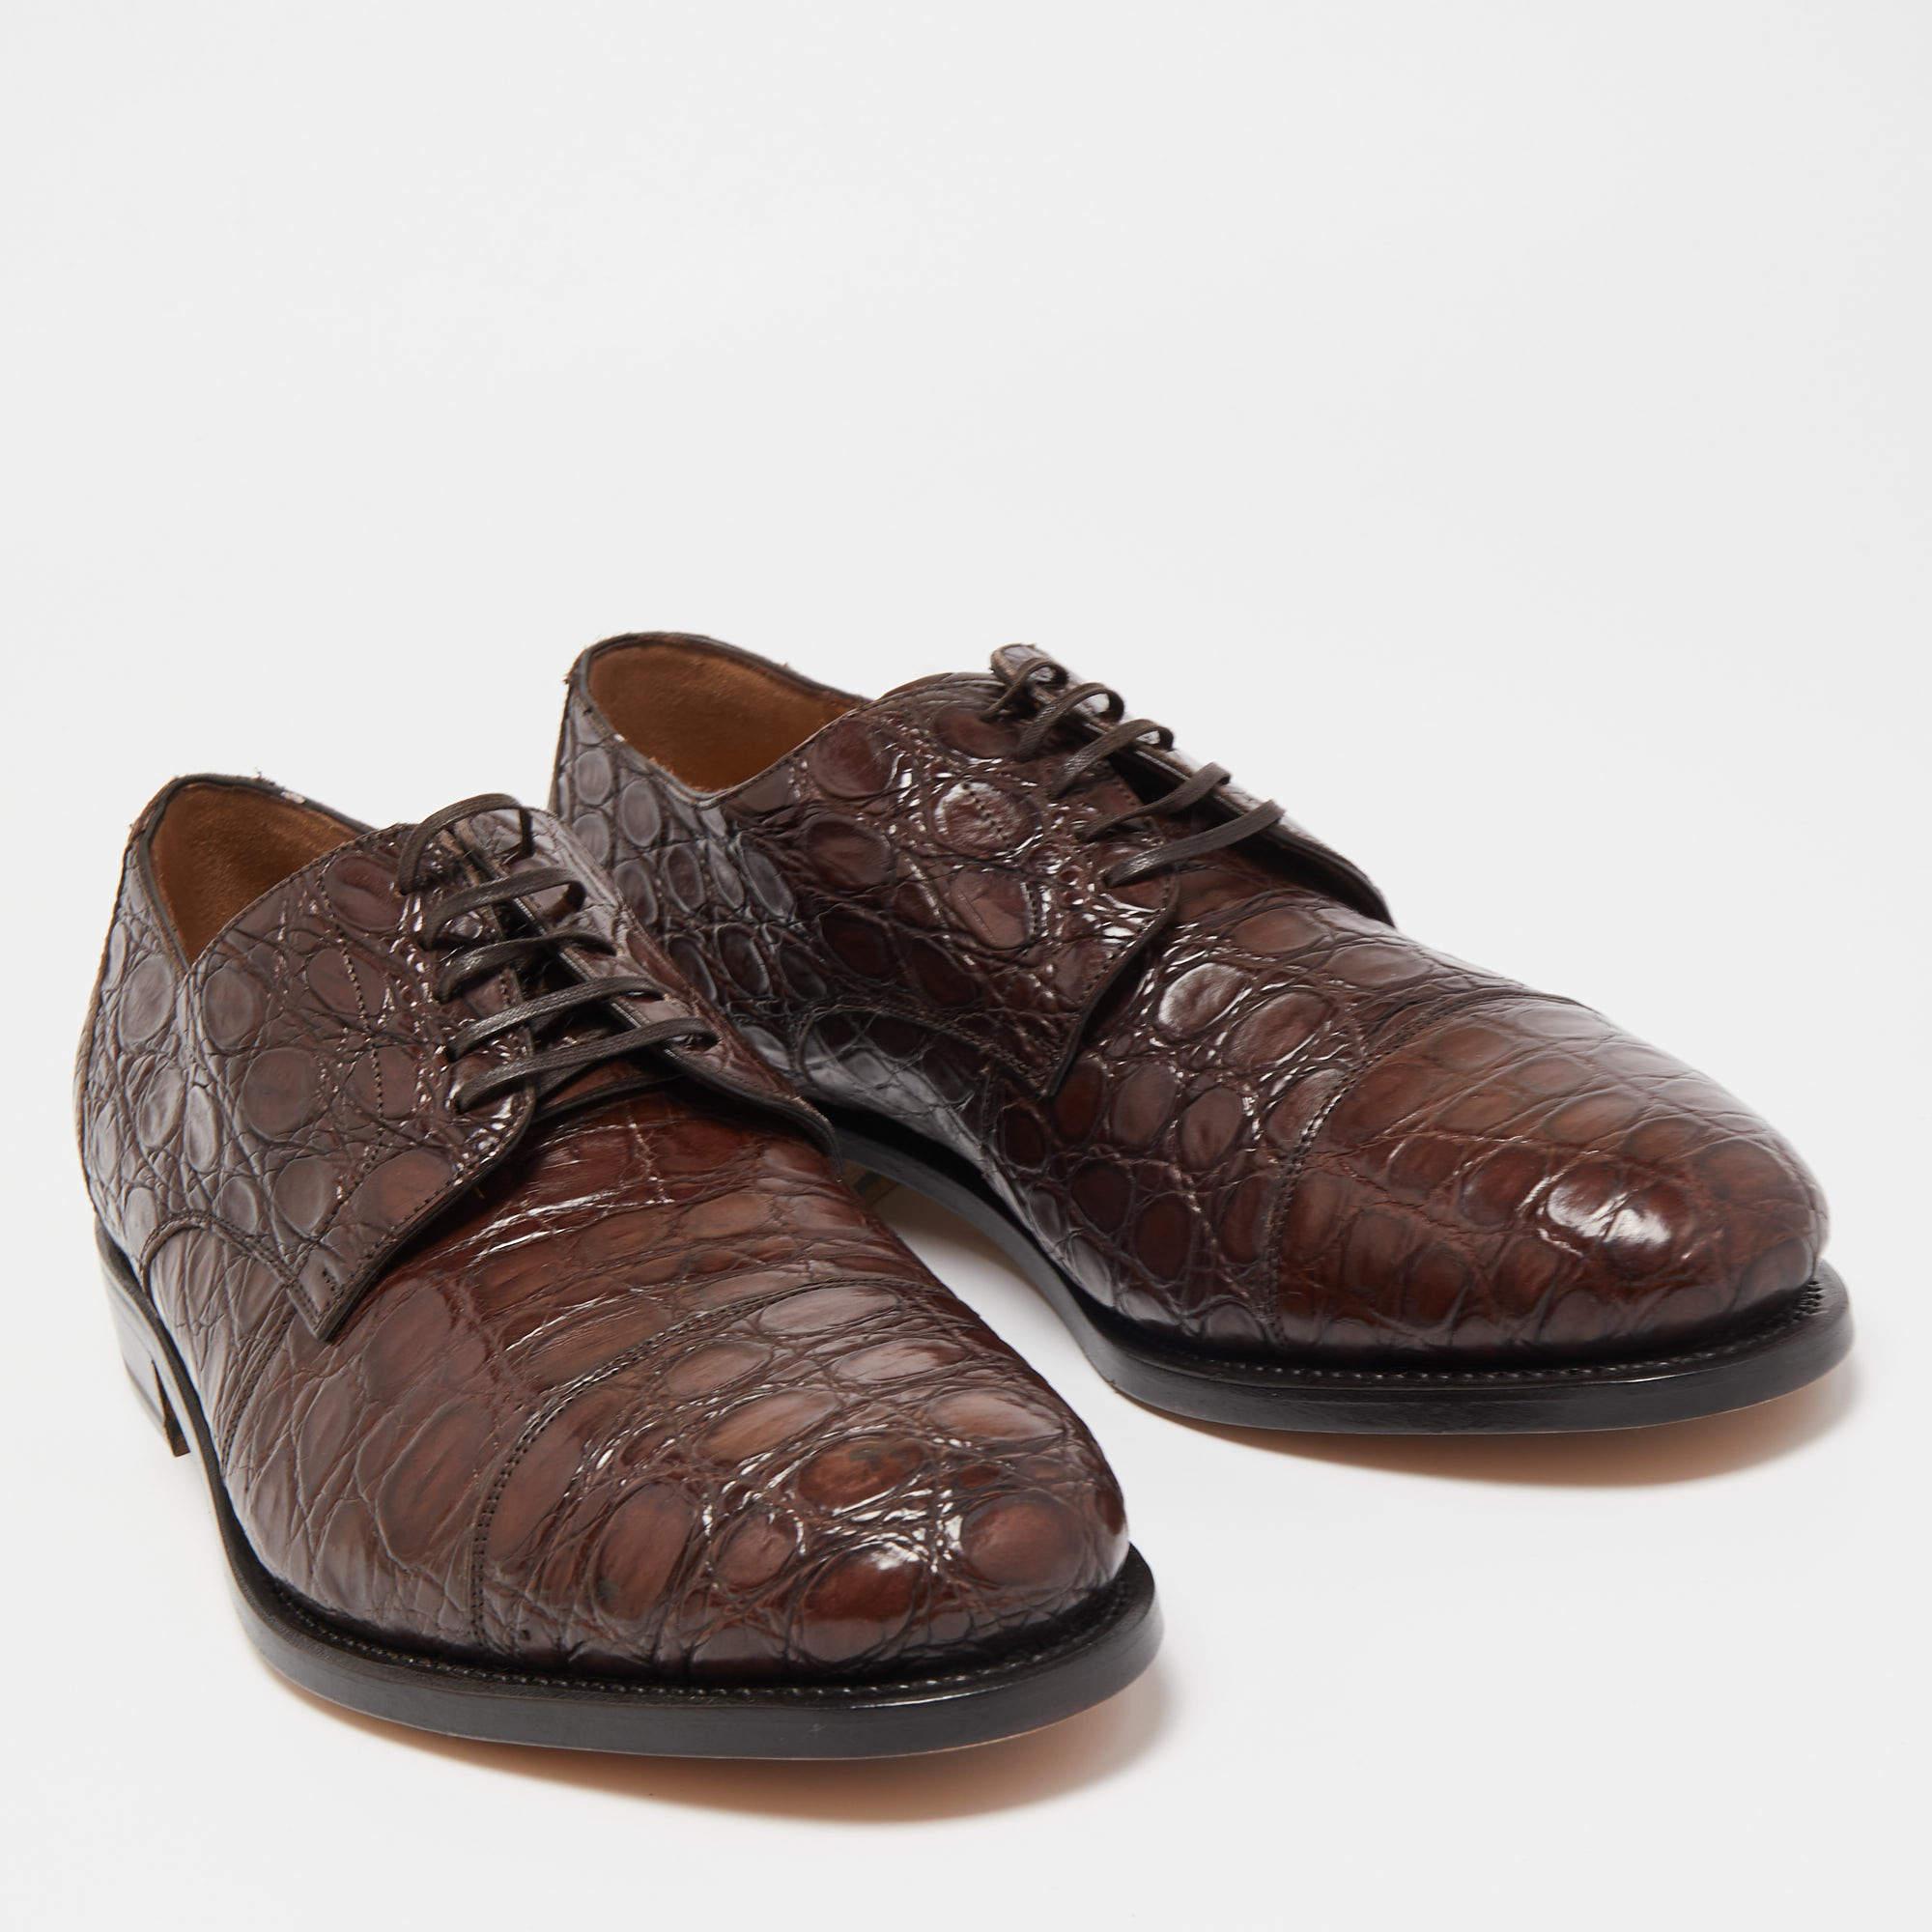 Let this comfortable pair be your first choice when you're out for a long day. These Salvatore Ferragamo derby shoes have well-sewn uppers beautifully set on durable soles.

